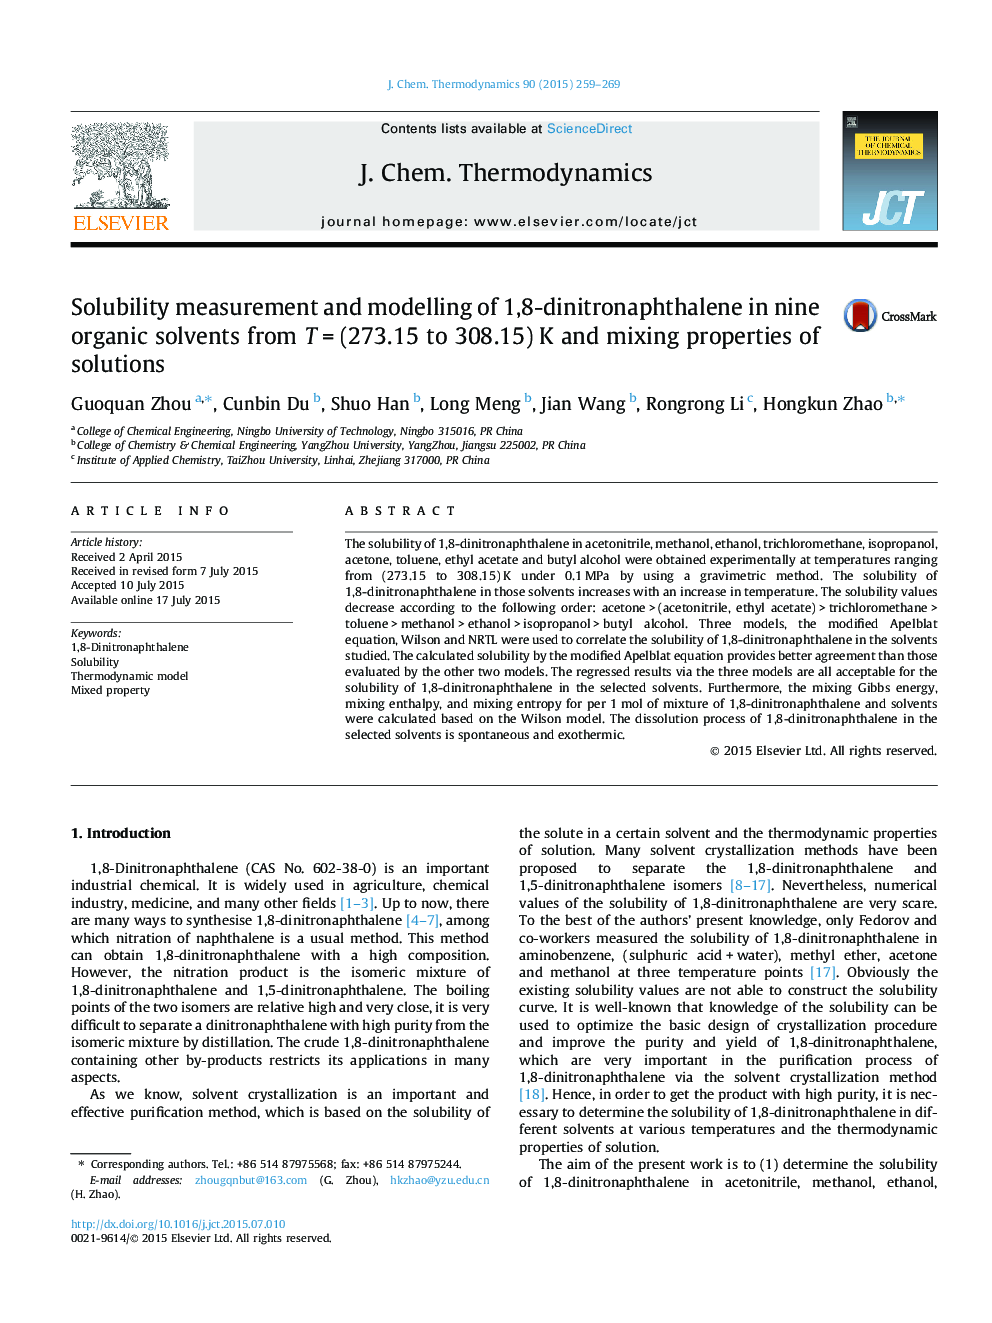 Solubility measurement and modelling of 1,8-dinitronaphthalene in nine organic solvents from TÂ =Â (273.15 to 308.15)Â K and mixing properties of solutions